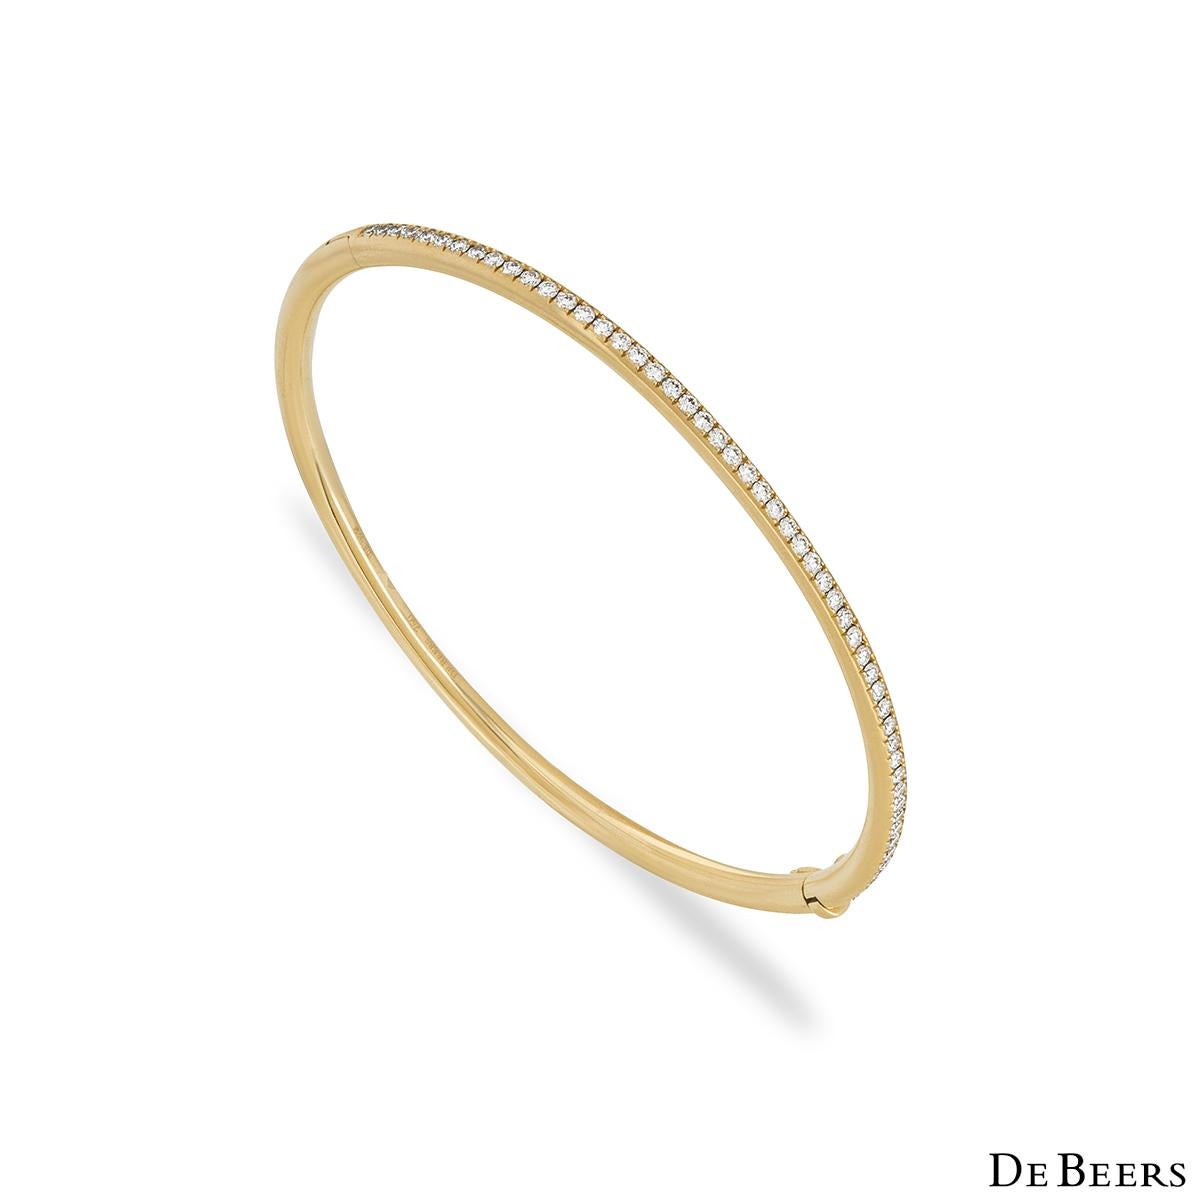 A timeless 18K yellow gold diamond bangle by De Beers from the Classics collection. This bangle features 52 micropavé set round brilliant cut diamonds totalling 0.64ct, predominately F-G colour and VS clarity. The bangle fits a wrist size of up to